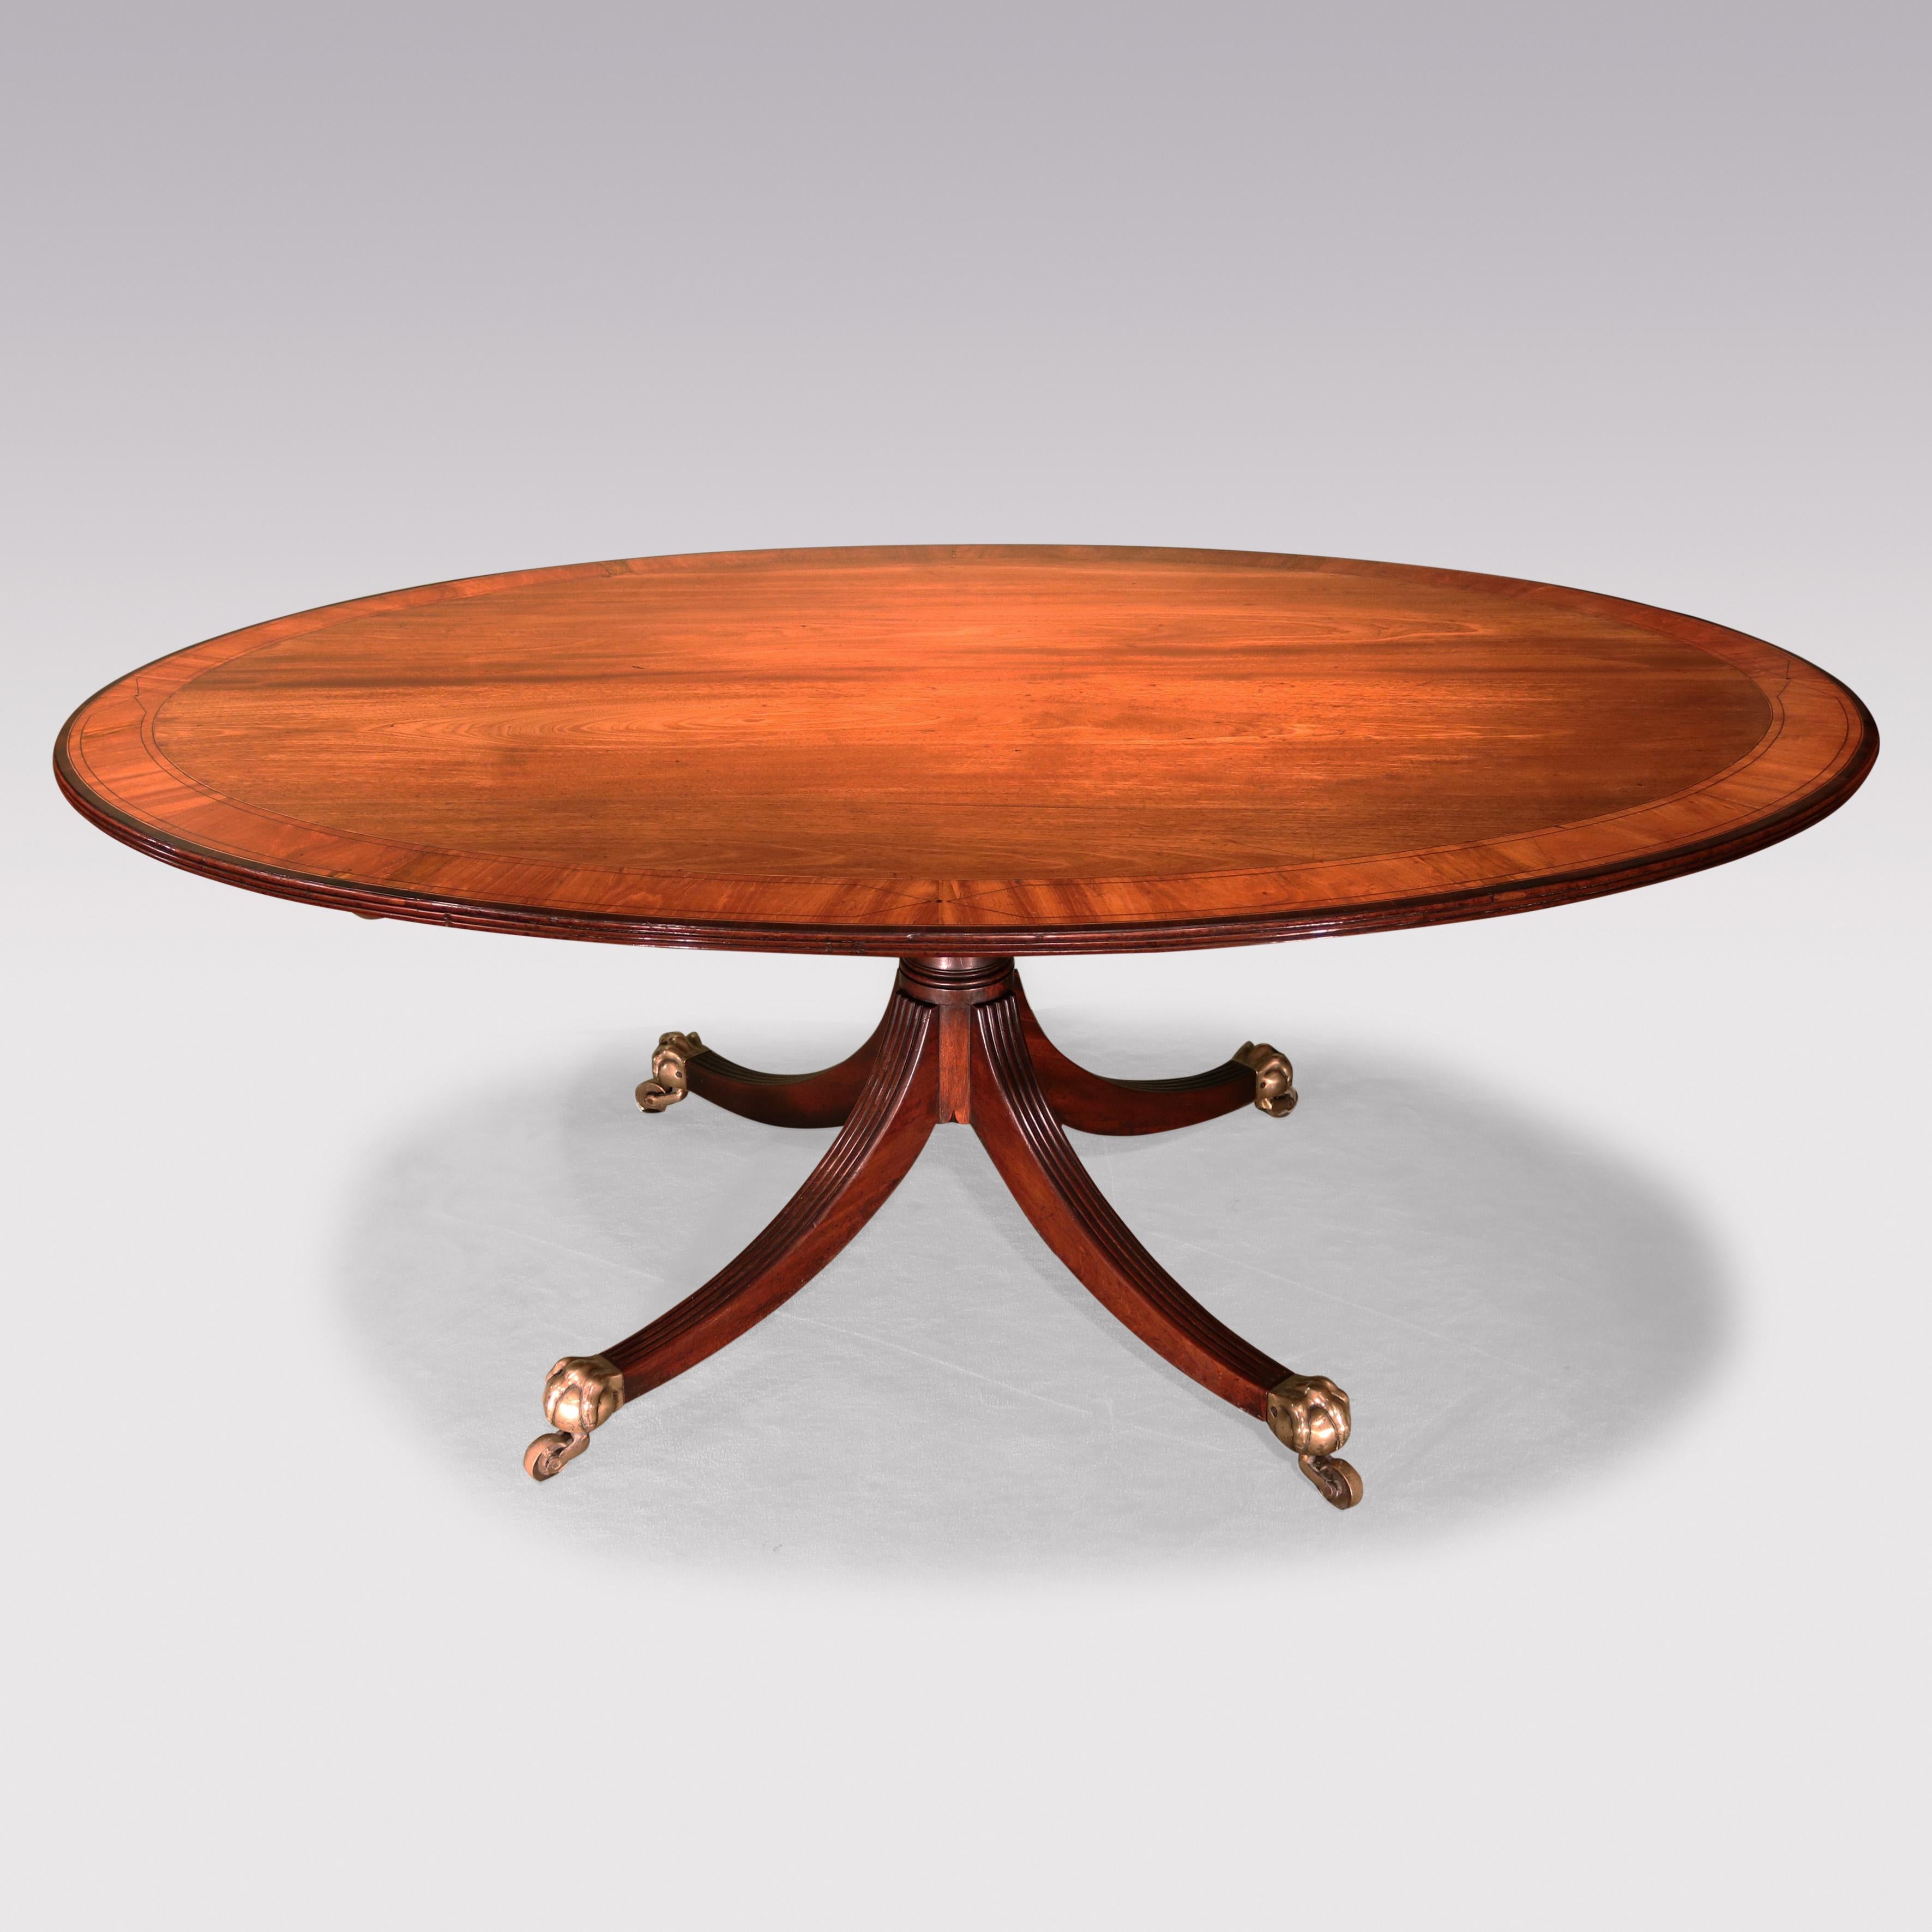 A fine and large George III period figured mahogany Breakfast Table, having boxwood & ebony strung & satinwood & purpleheart crossbanded reeded edged oval top, supported on gun-barrel stem ending on reeded 4-splay legs retaining original brass paw &